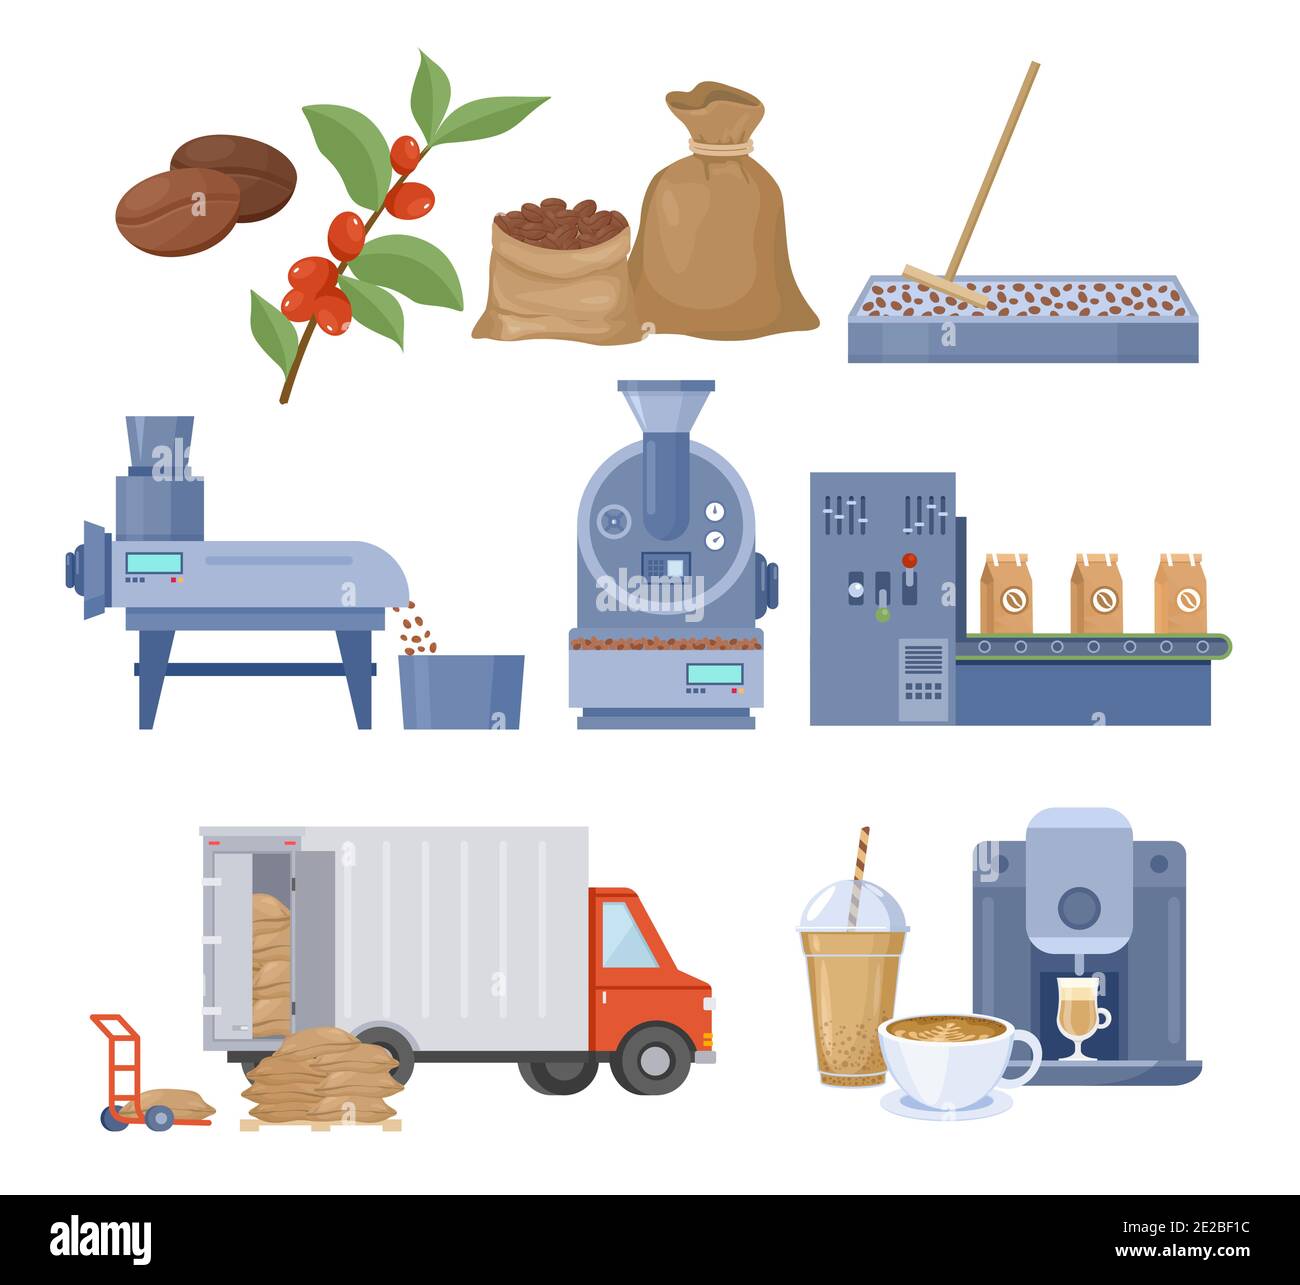 Coffee production vector illustration set. Processing and roasting coffee beans, making coffee. Stock Vector